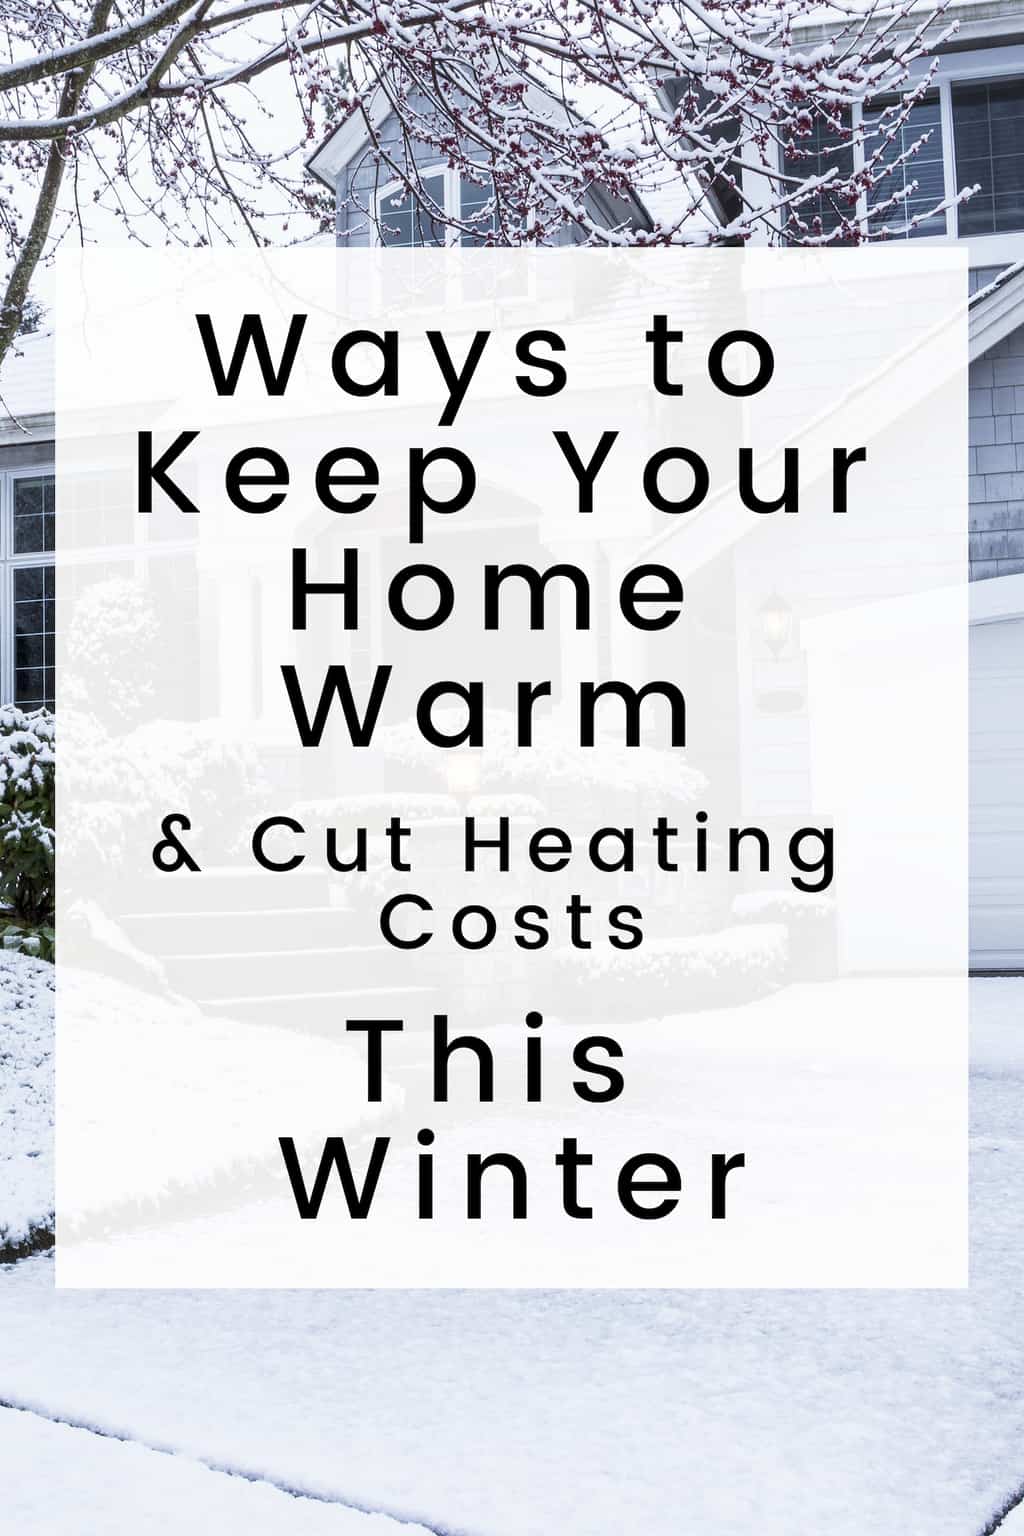 Use these clever home heating tips to keep your home warm this winter and help save on heating costs.